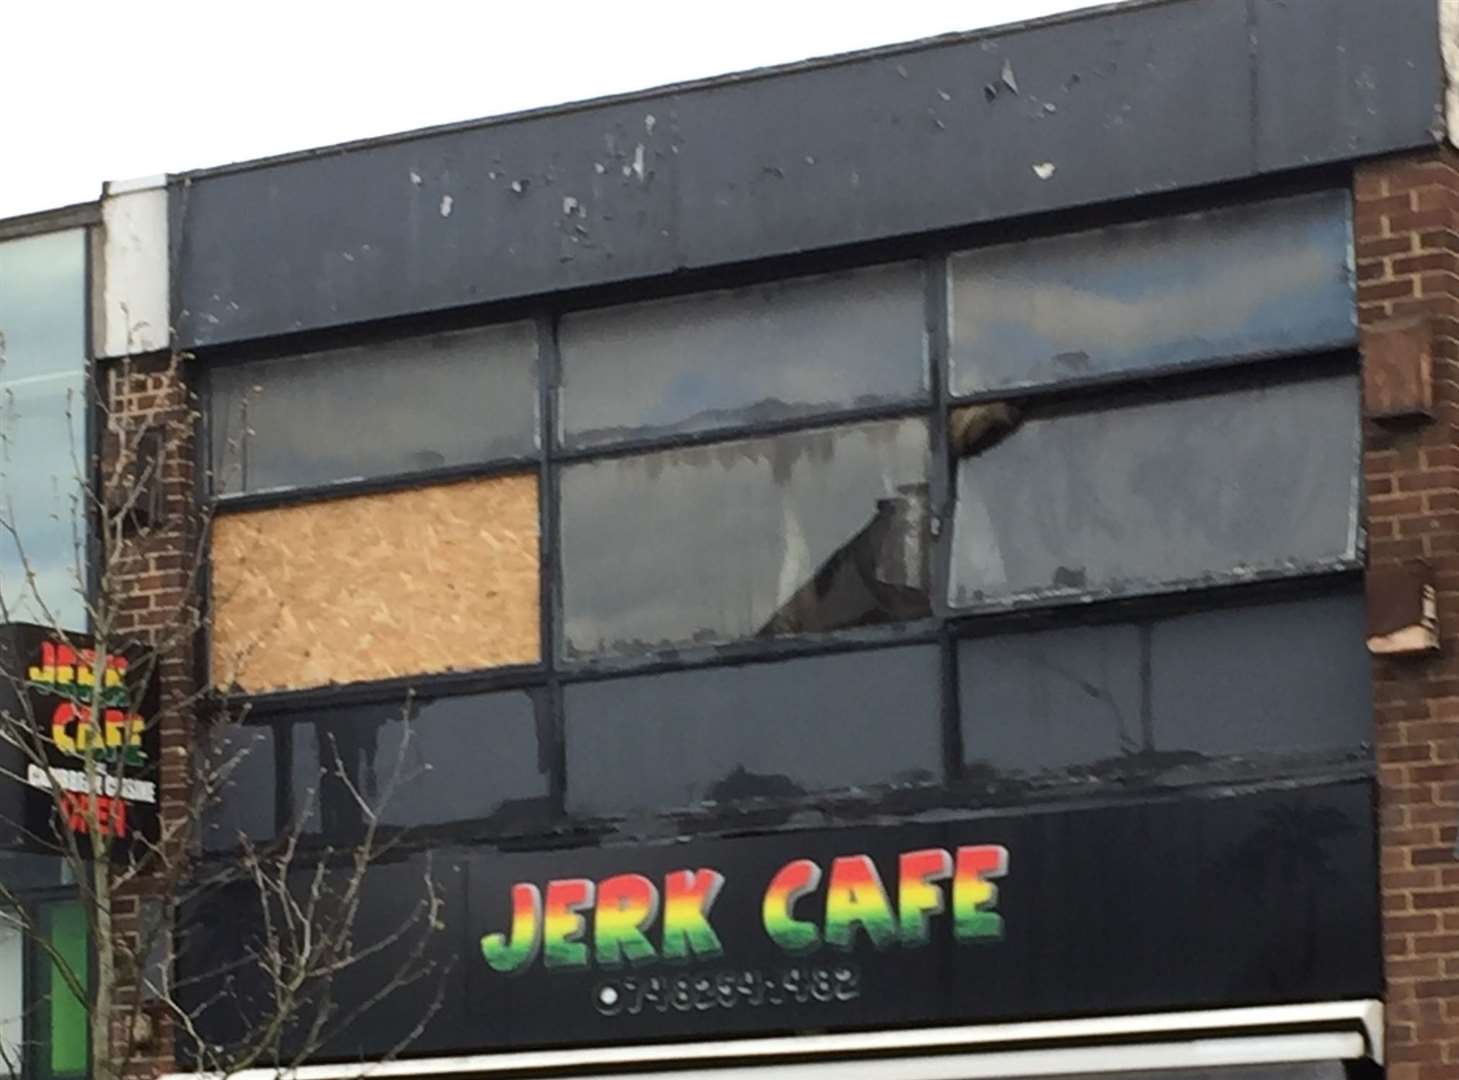 Firefighters said damage was caused to an upstairs storage room as owners of Jerk Cafe say the business will be closed until further notice